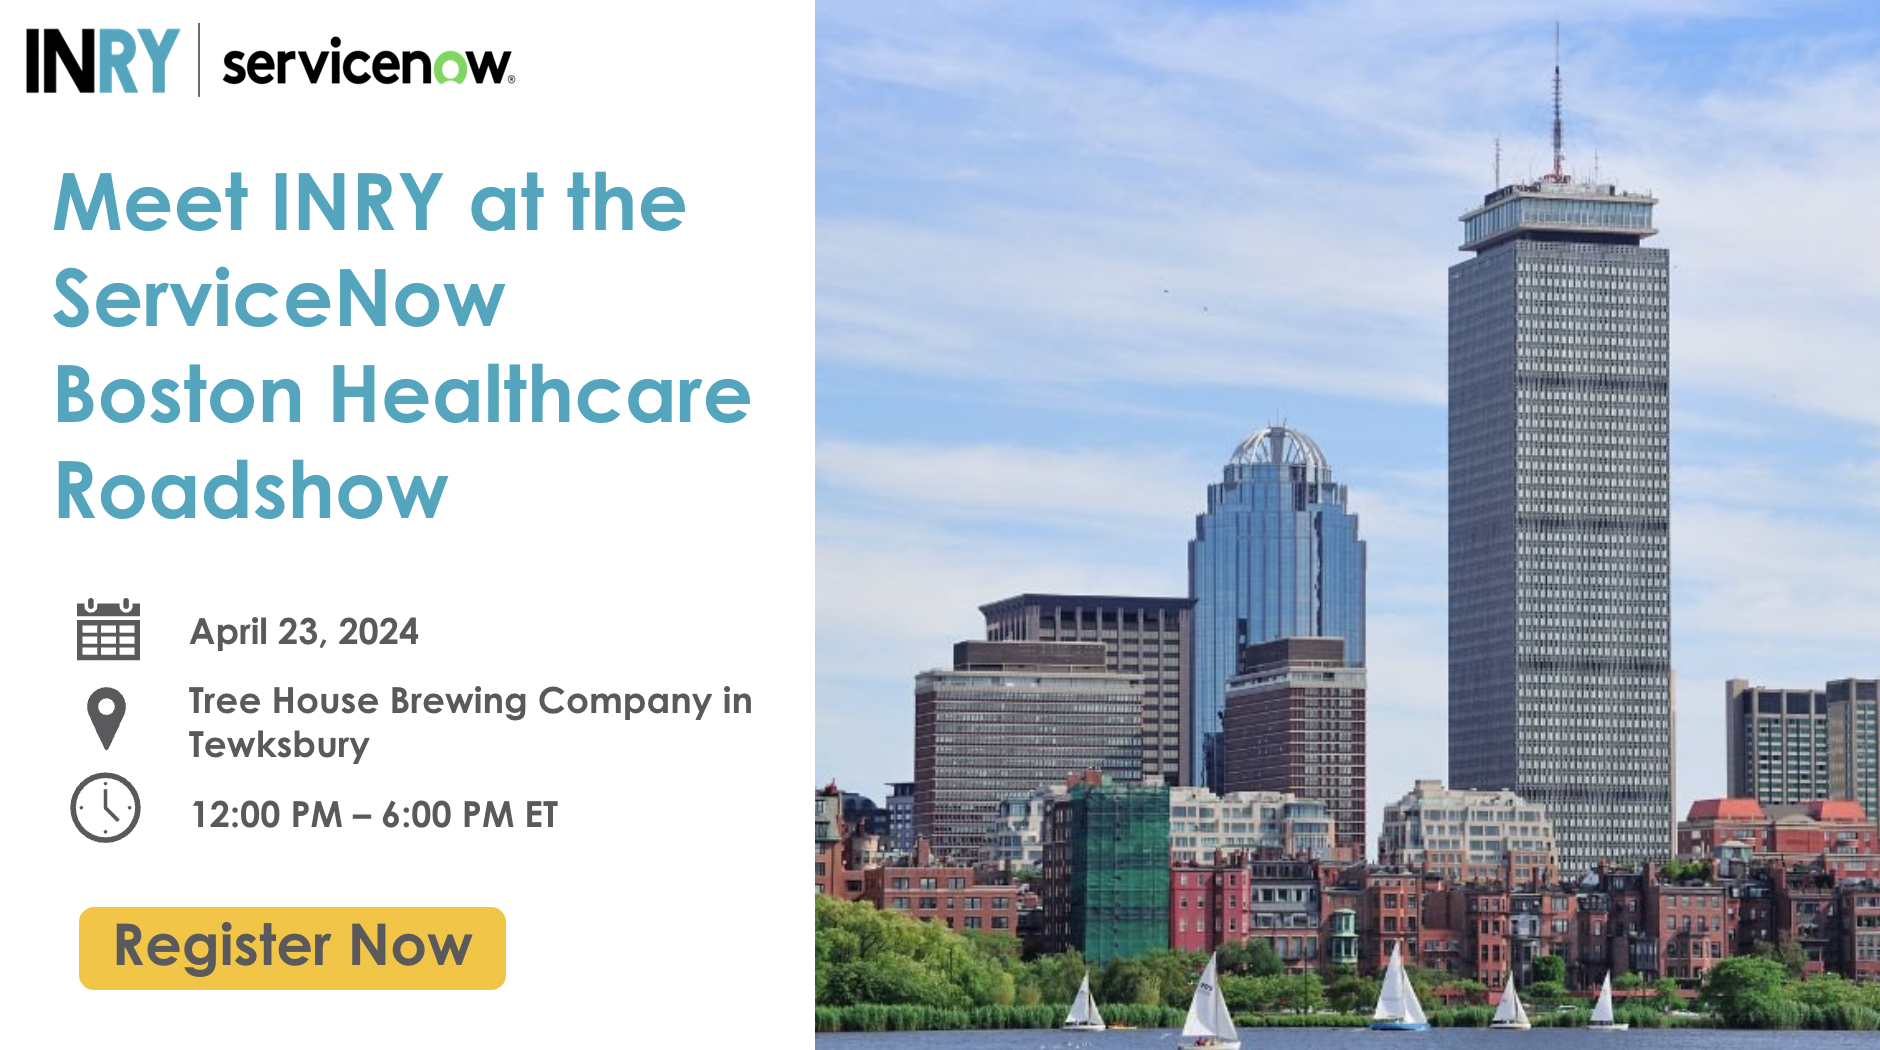 Meet INRY at the ServiceNow Boston Healthcare Roadshow